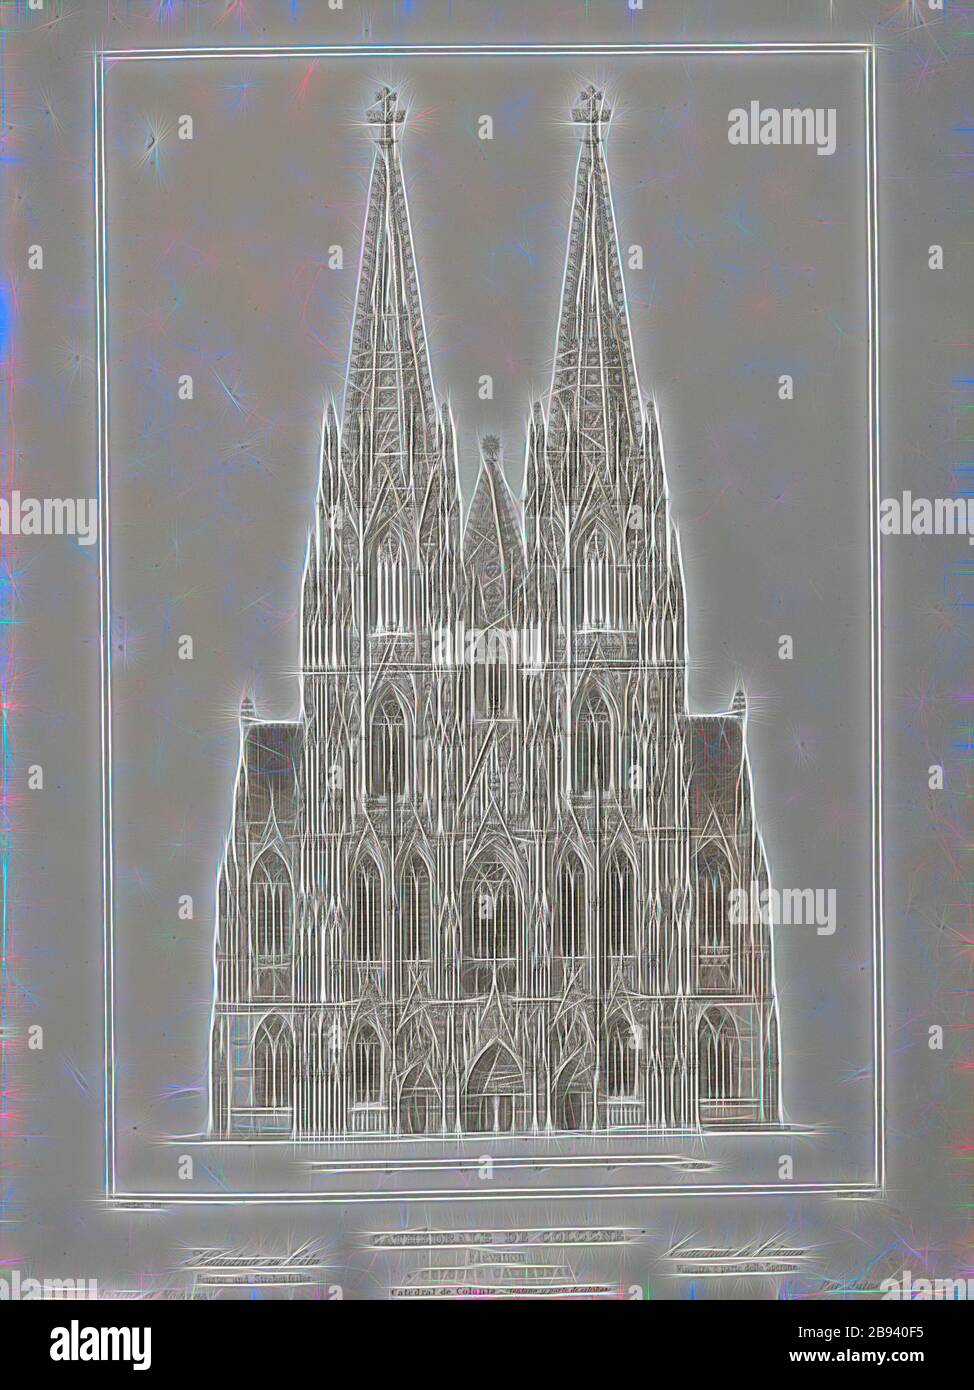 Cologne Cathedral. Elevation, Cologne Cathedral, signed: Jourdan del, Bury sculp, Pl., 37, Jourdan, Jean Marie (del.), Bury, Jean Baptiste Marie (sc.), 1853, Jules Gailhabaud: Monuments anciens et modernes: collection formant une histoire de l'architecture des différents peuples à toutes les époques. Paris: Librairie de Firmin Didot frères, 1853, Reimagined by Gibon, design of warm cheerful glowing of brightness and light rays radiance. Classic art reinvented with a modern twist. Photography inspired by futurism, embracing dynamic energy of modern technology, movement, speed and revolutionize Stock Photo